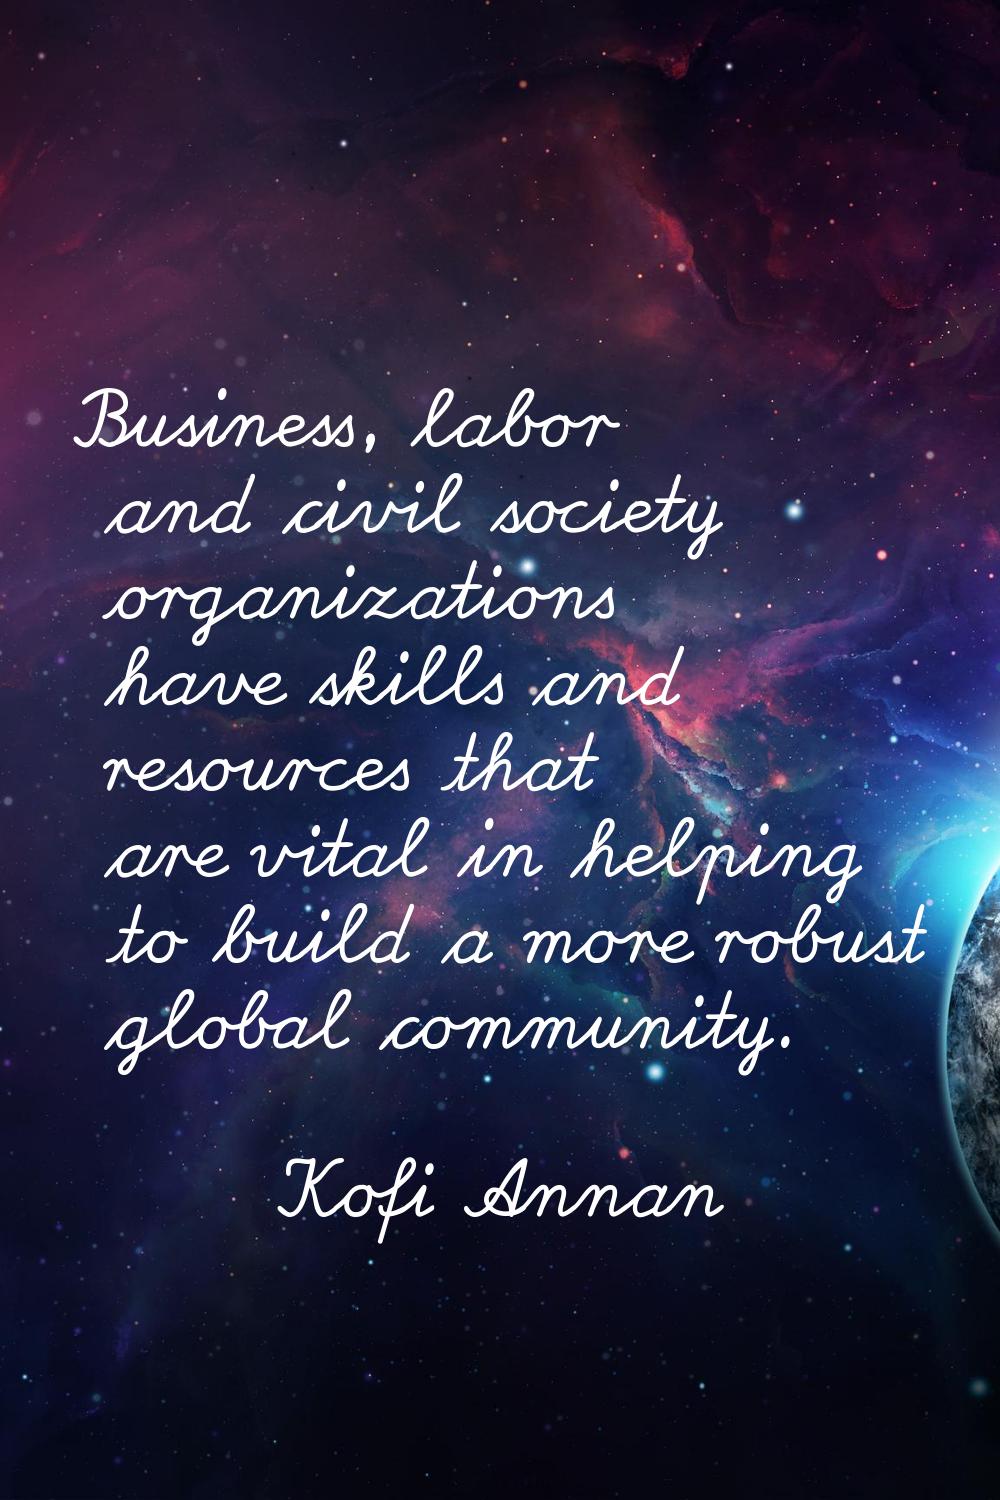 Business, labor and civil society organizations have skills and resources that are vital in helping